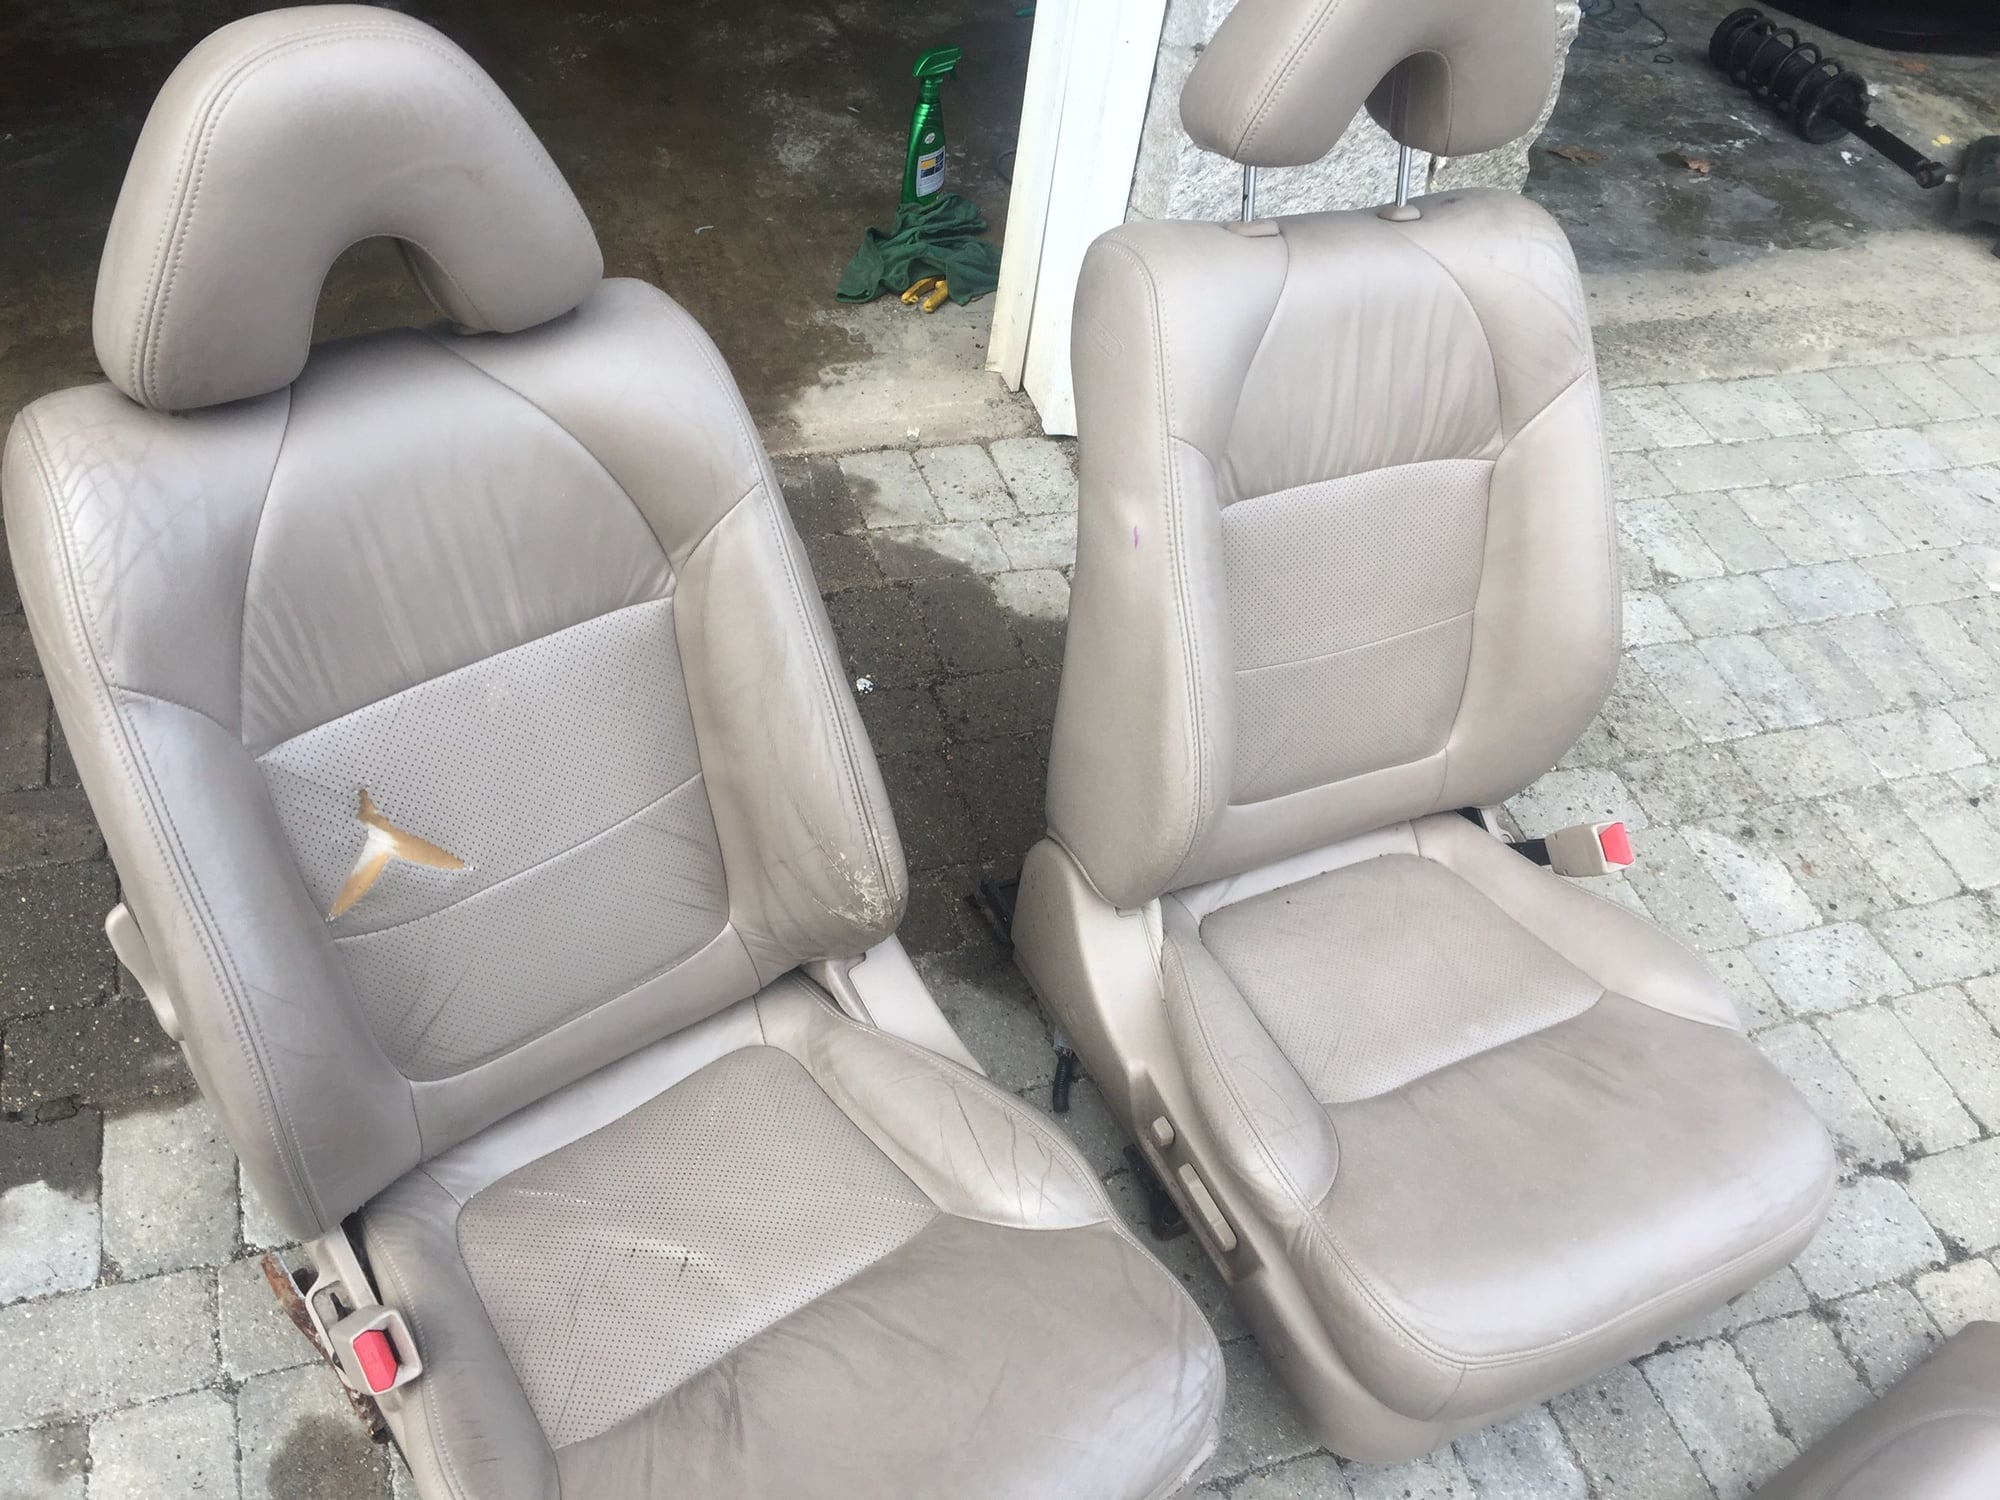 Interior/Upholstery - FS: Acura type s seats tan - Used - 1999 to 2003 Acura TL - Morris, CT 06763, United States